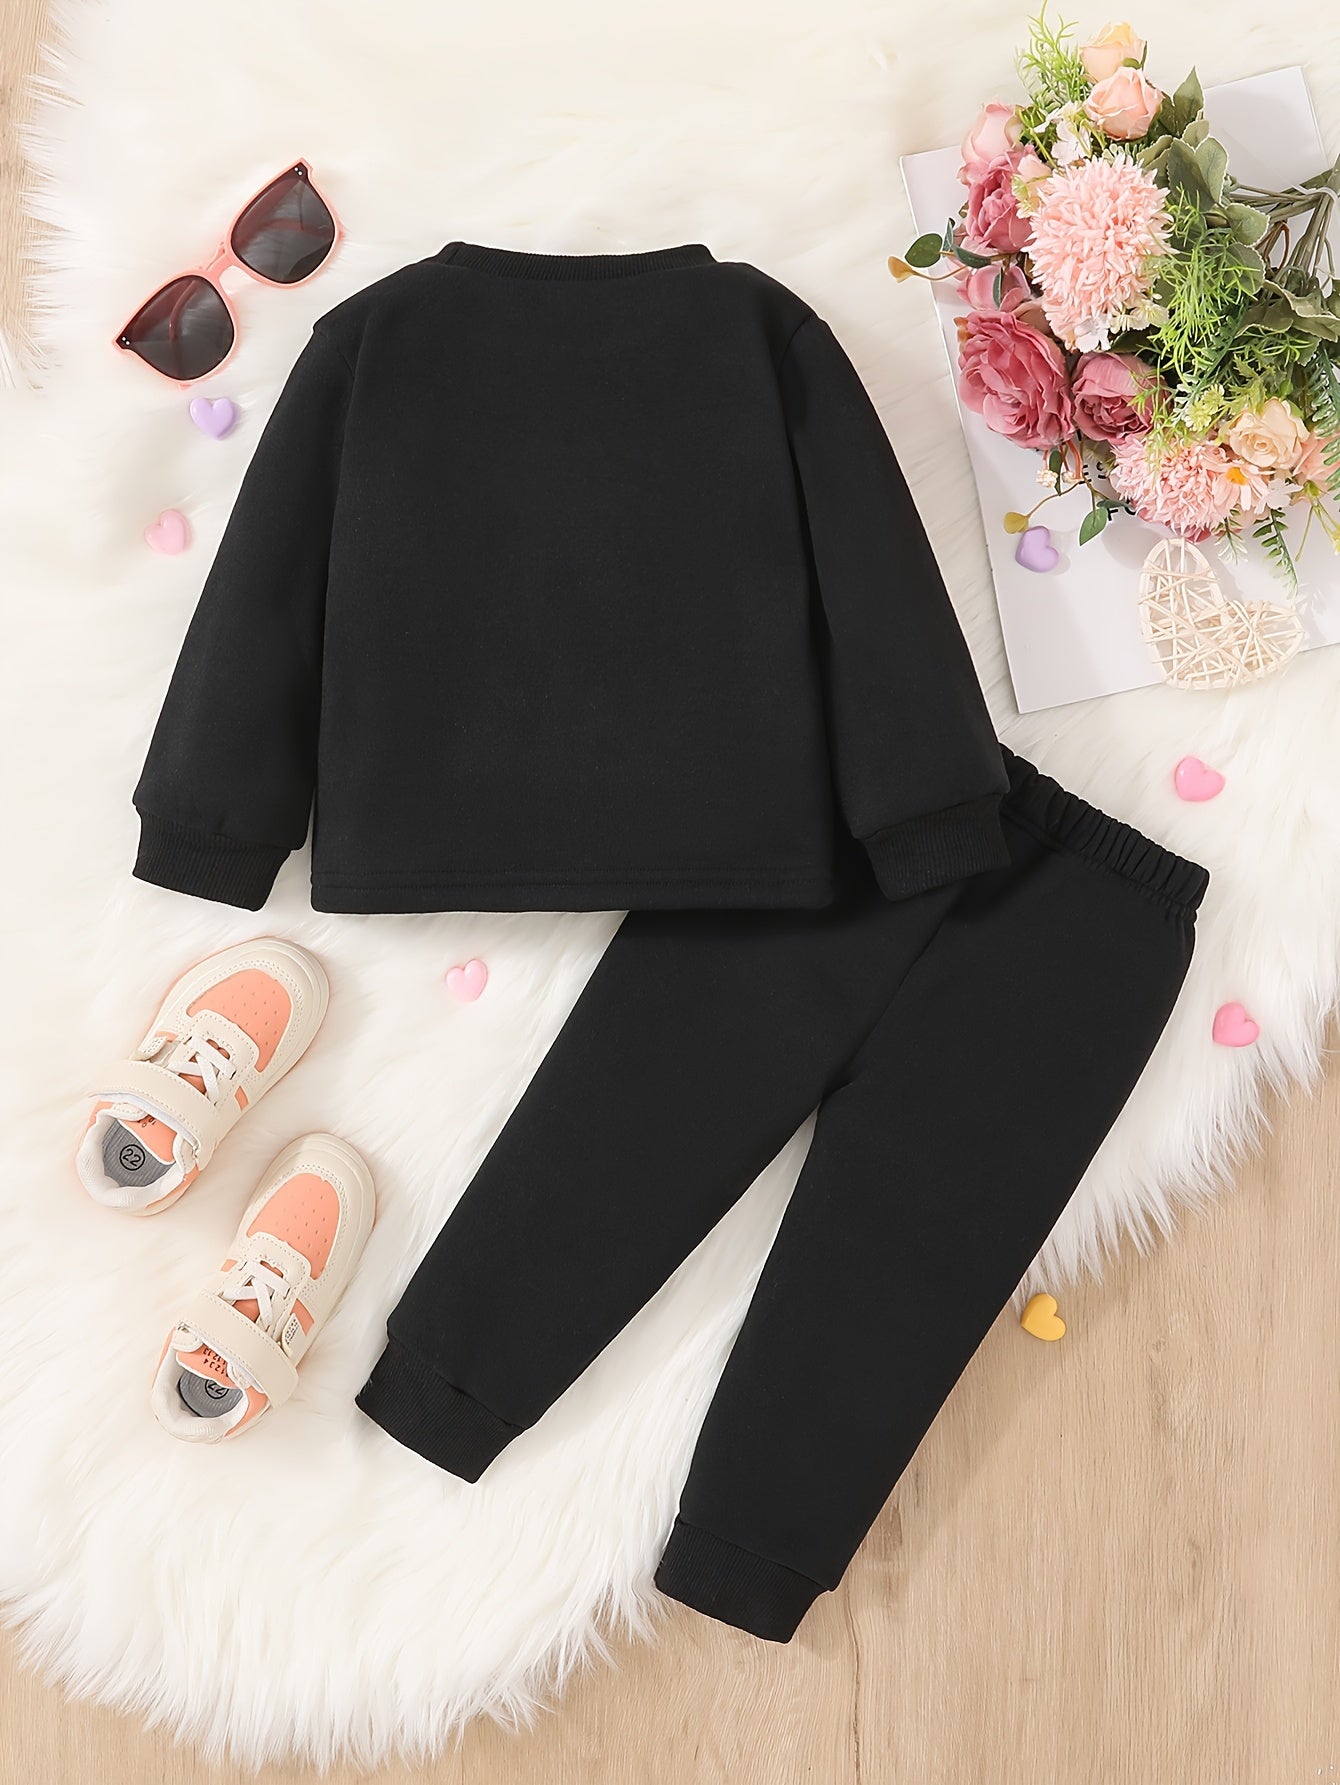 Baby Girls Casual Long Sleeve Thickened Sweatshirt Set, P Letter Print Fashion Sweatshirt + Simple Trousers For Autumn And Winter